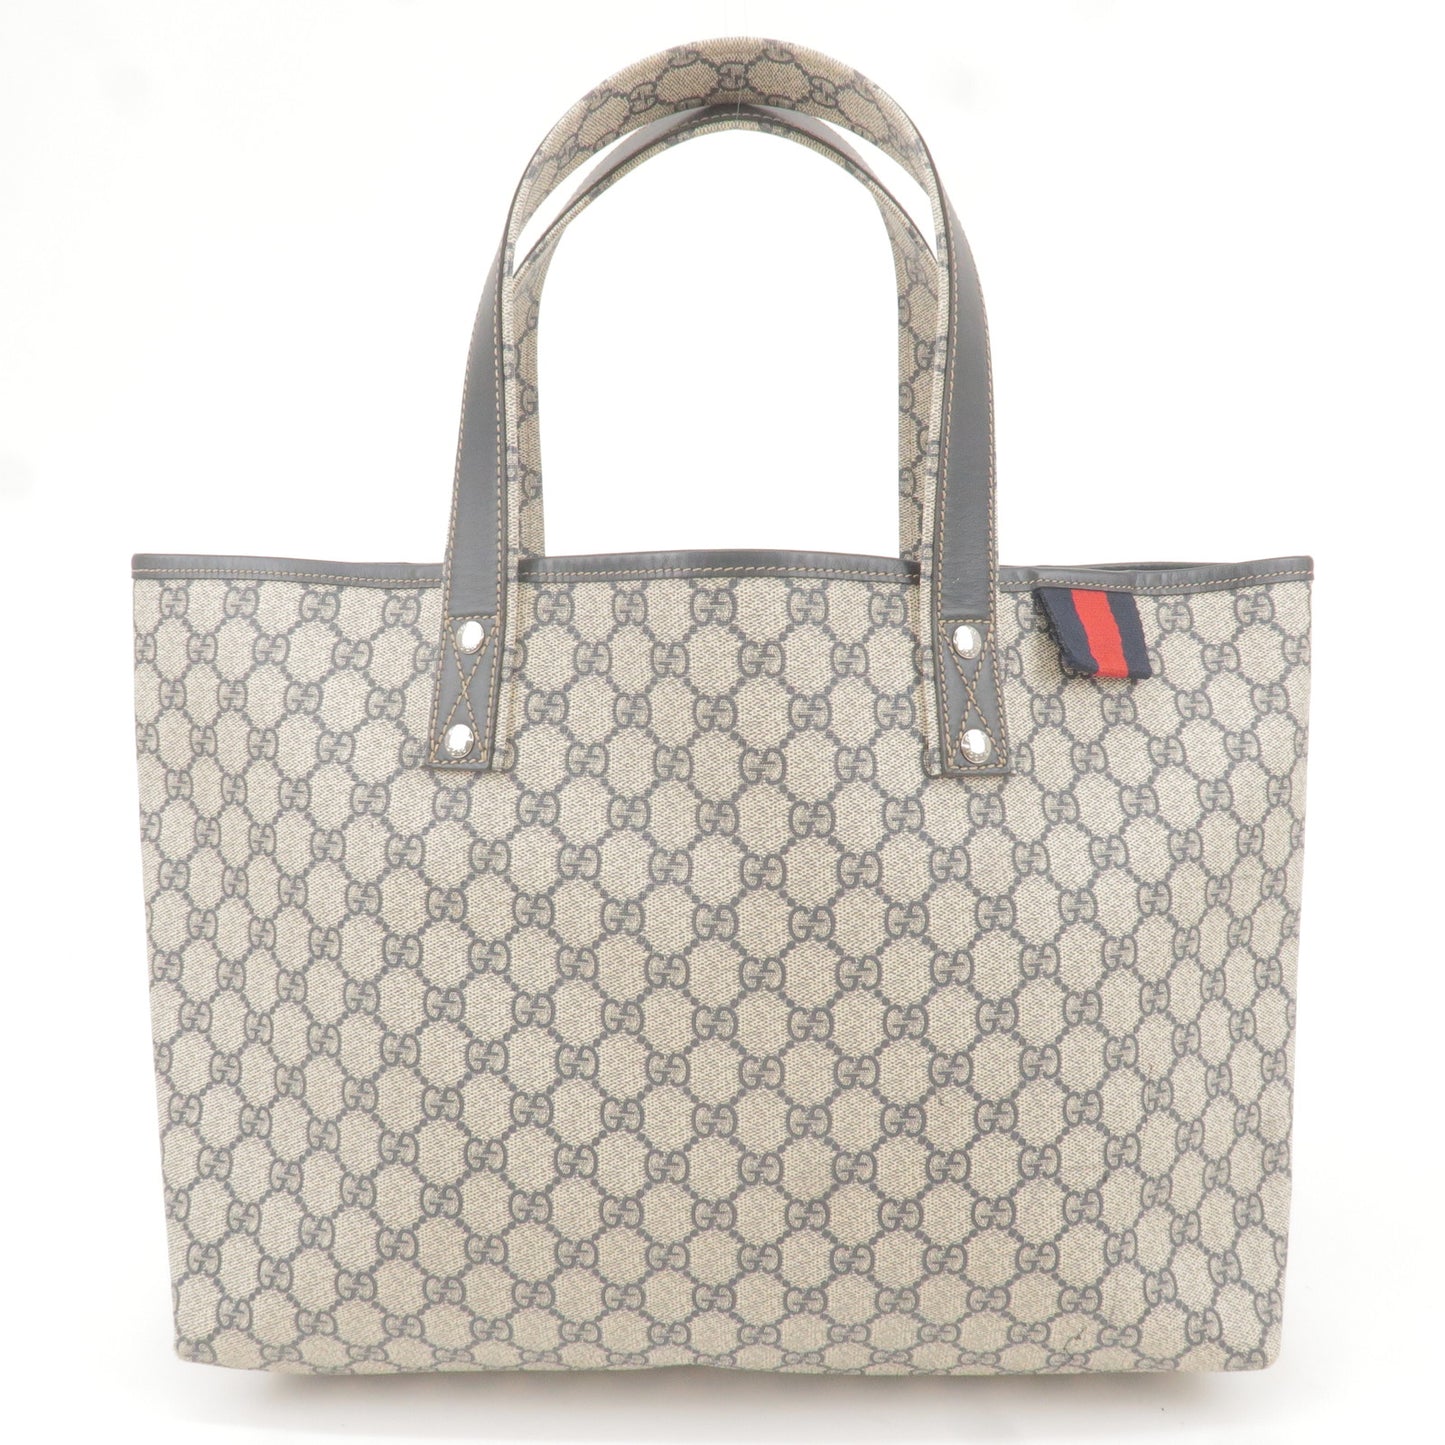 GUCCI Sherry GG Supreme Leather Tote Bag Navy Beige 211134